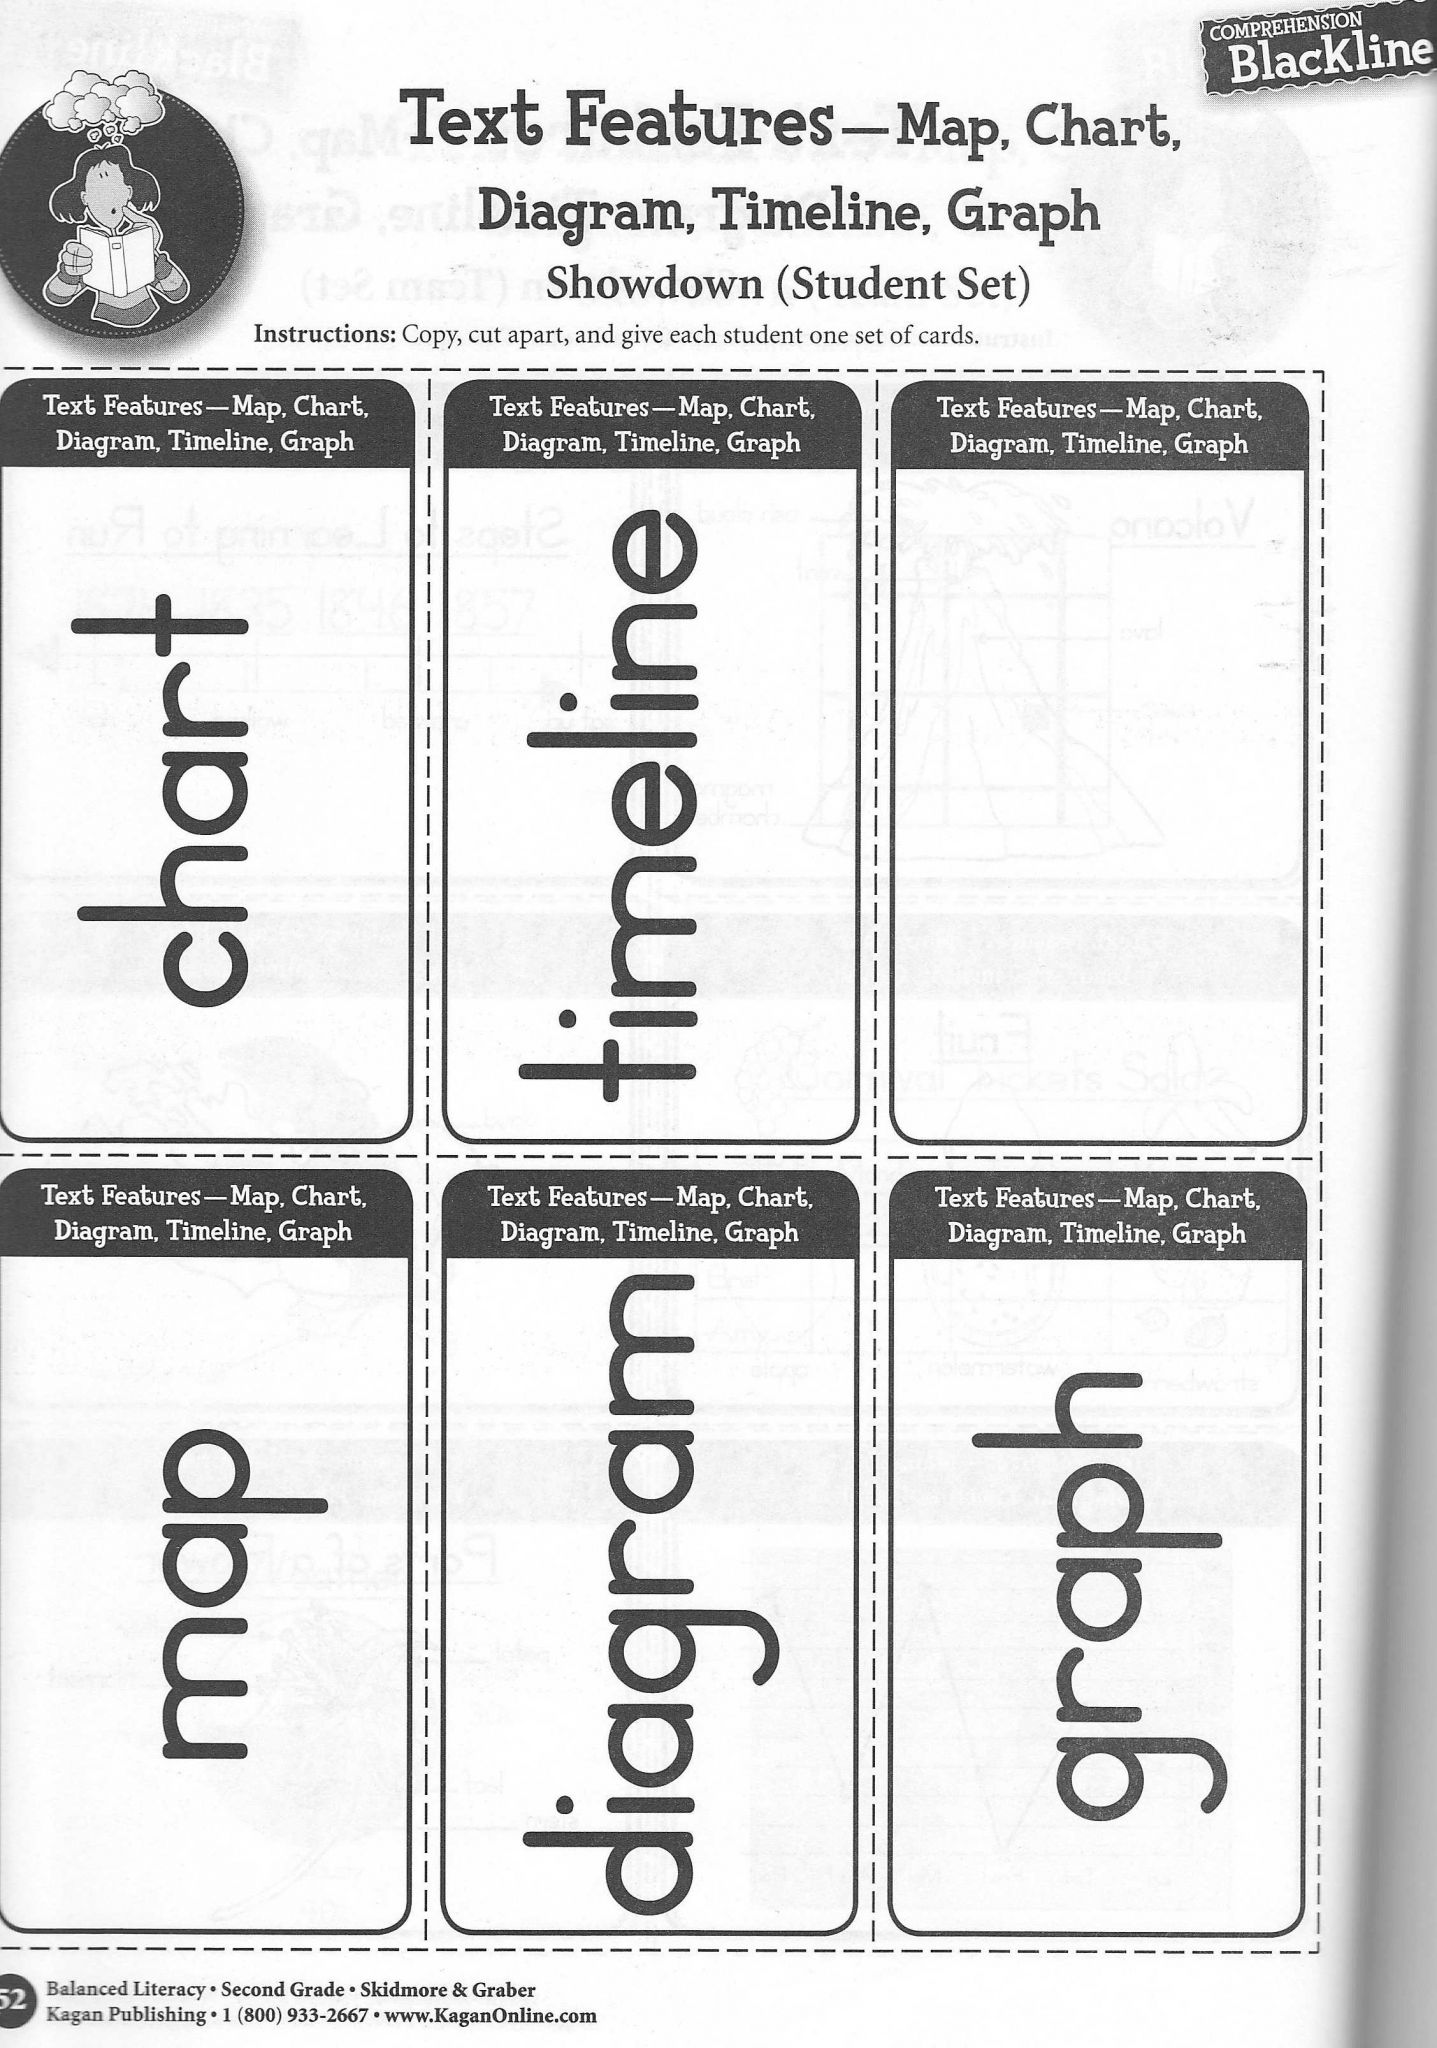 Free Comprehension Worksheets together with Worksheet Text Features Worksheet 2nd Grade Worksheet Fun